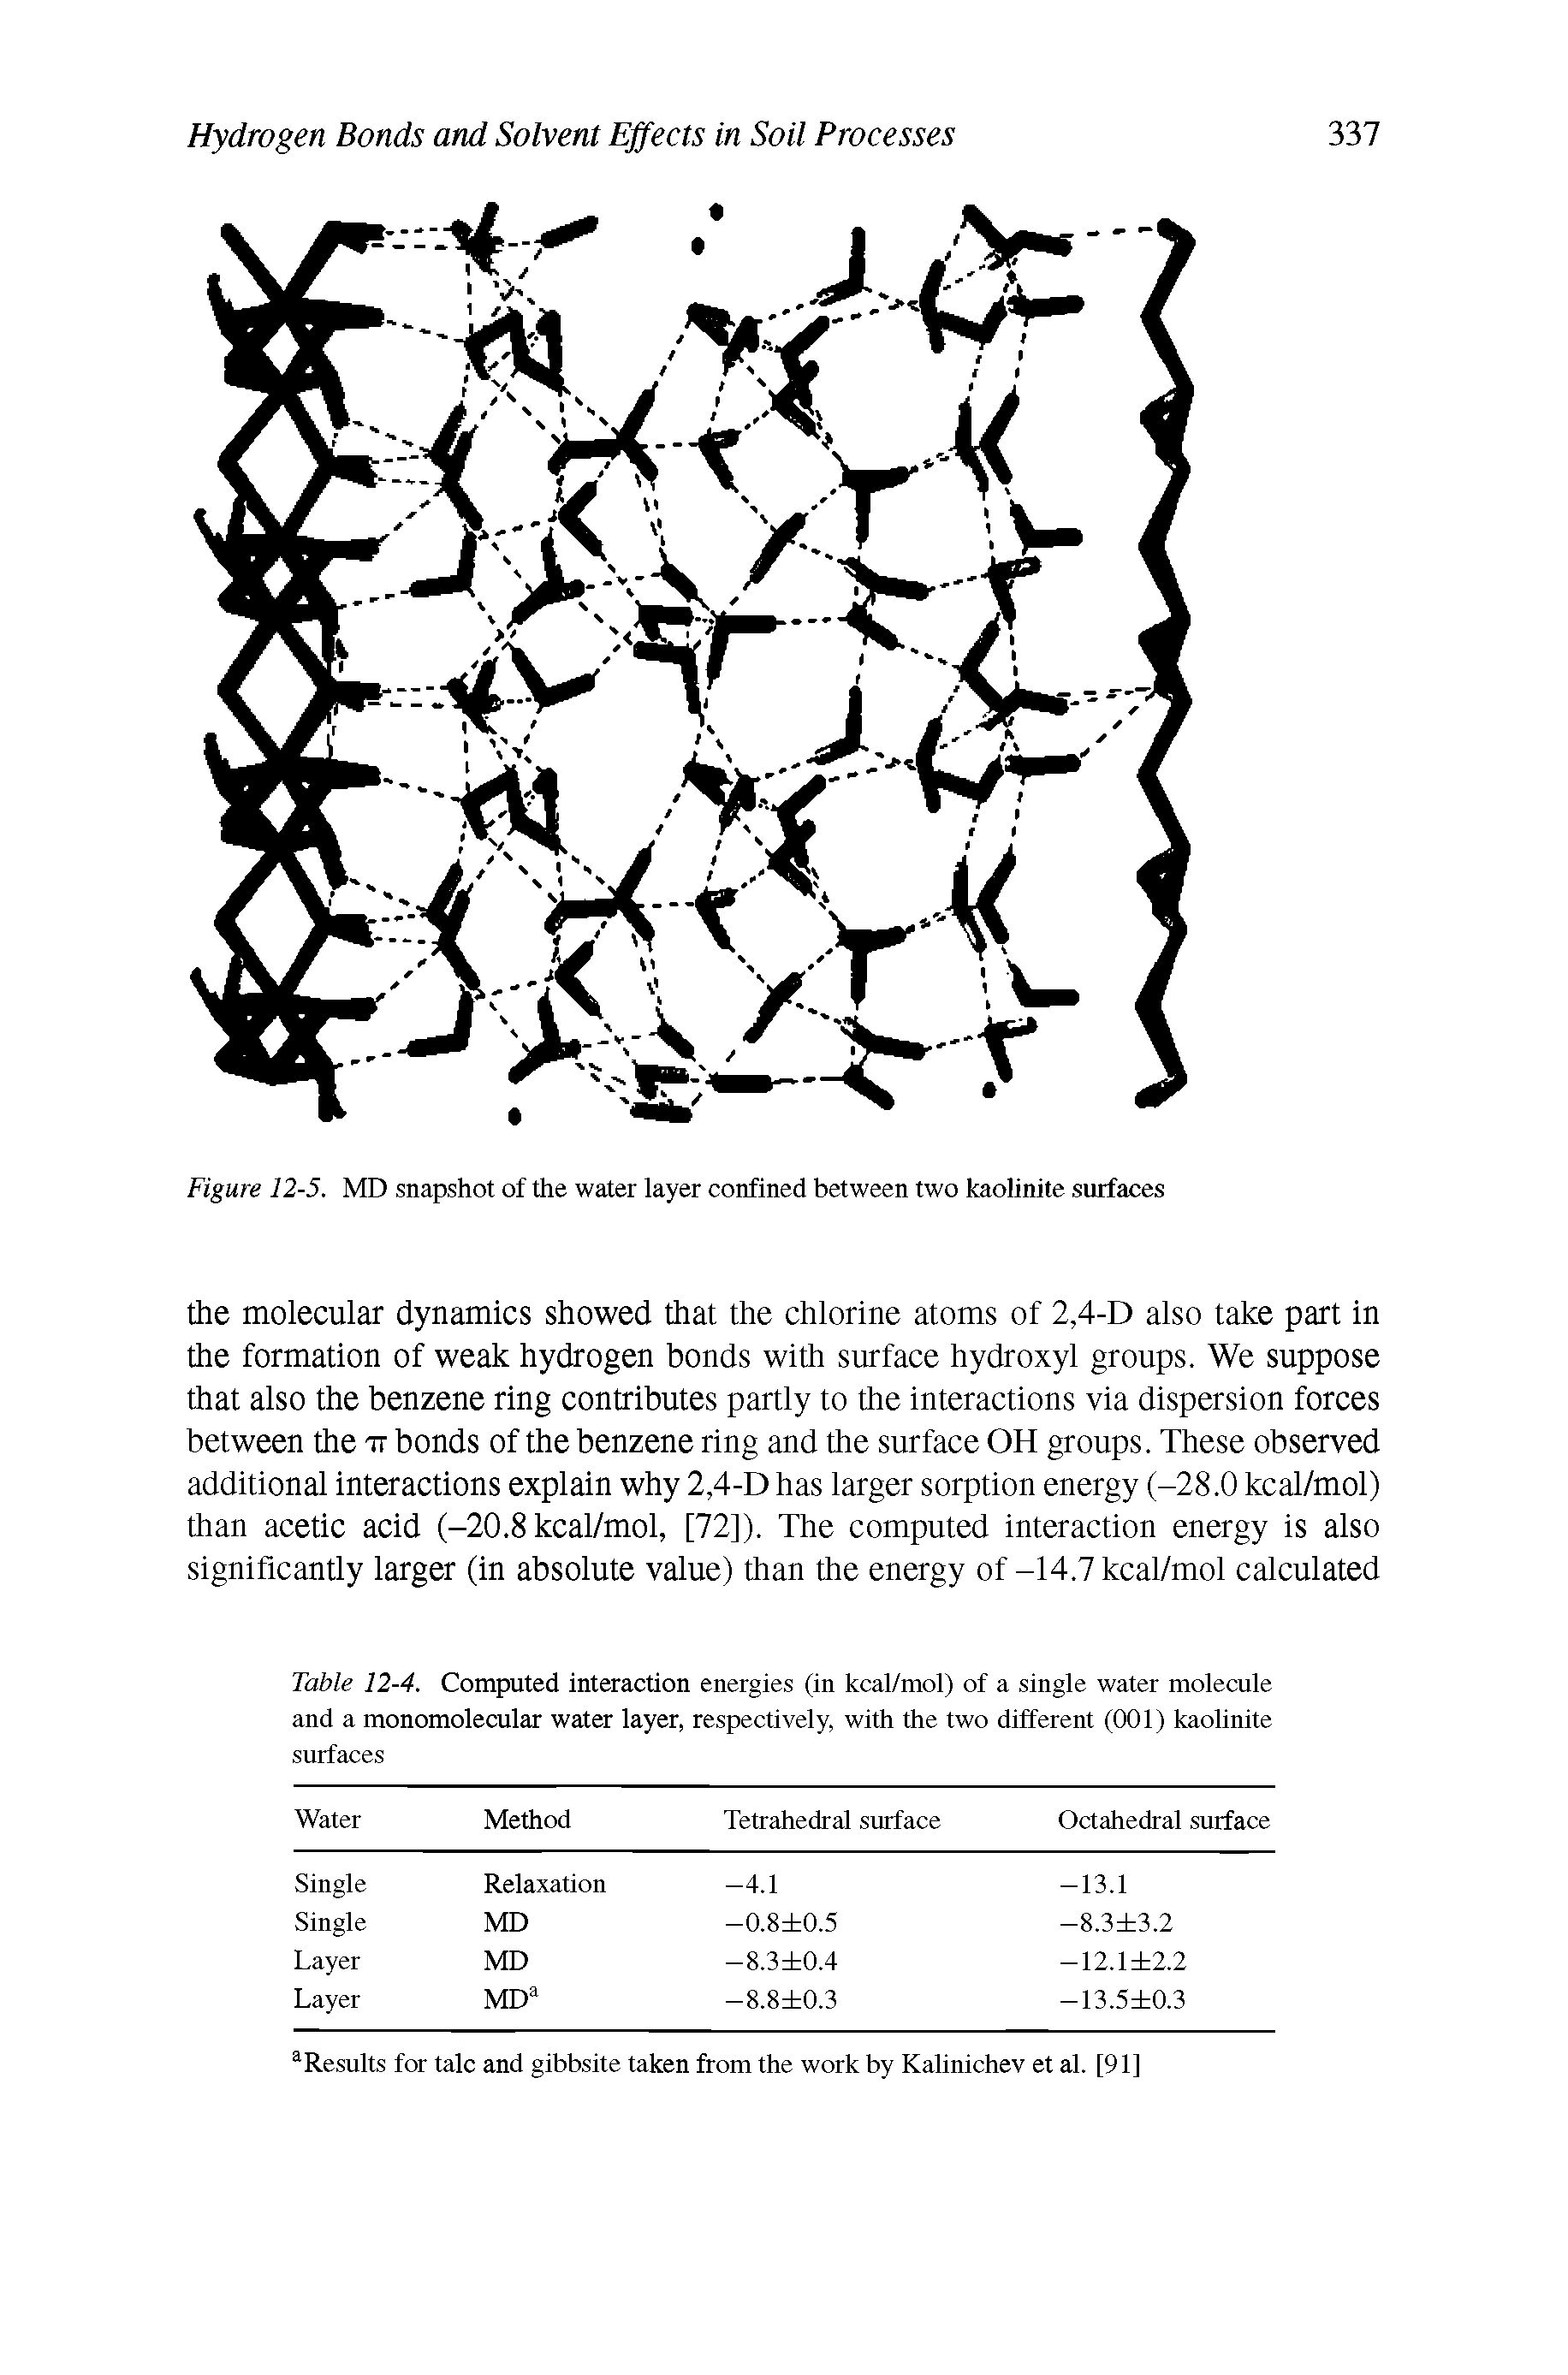 Table 12-4. Computed interaction energies (in kcal/mol) of a single water molecule and a monomolecular water layer, respectively, with the two different (001) kaolinite surfaces...